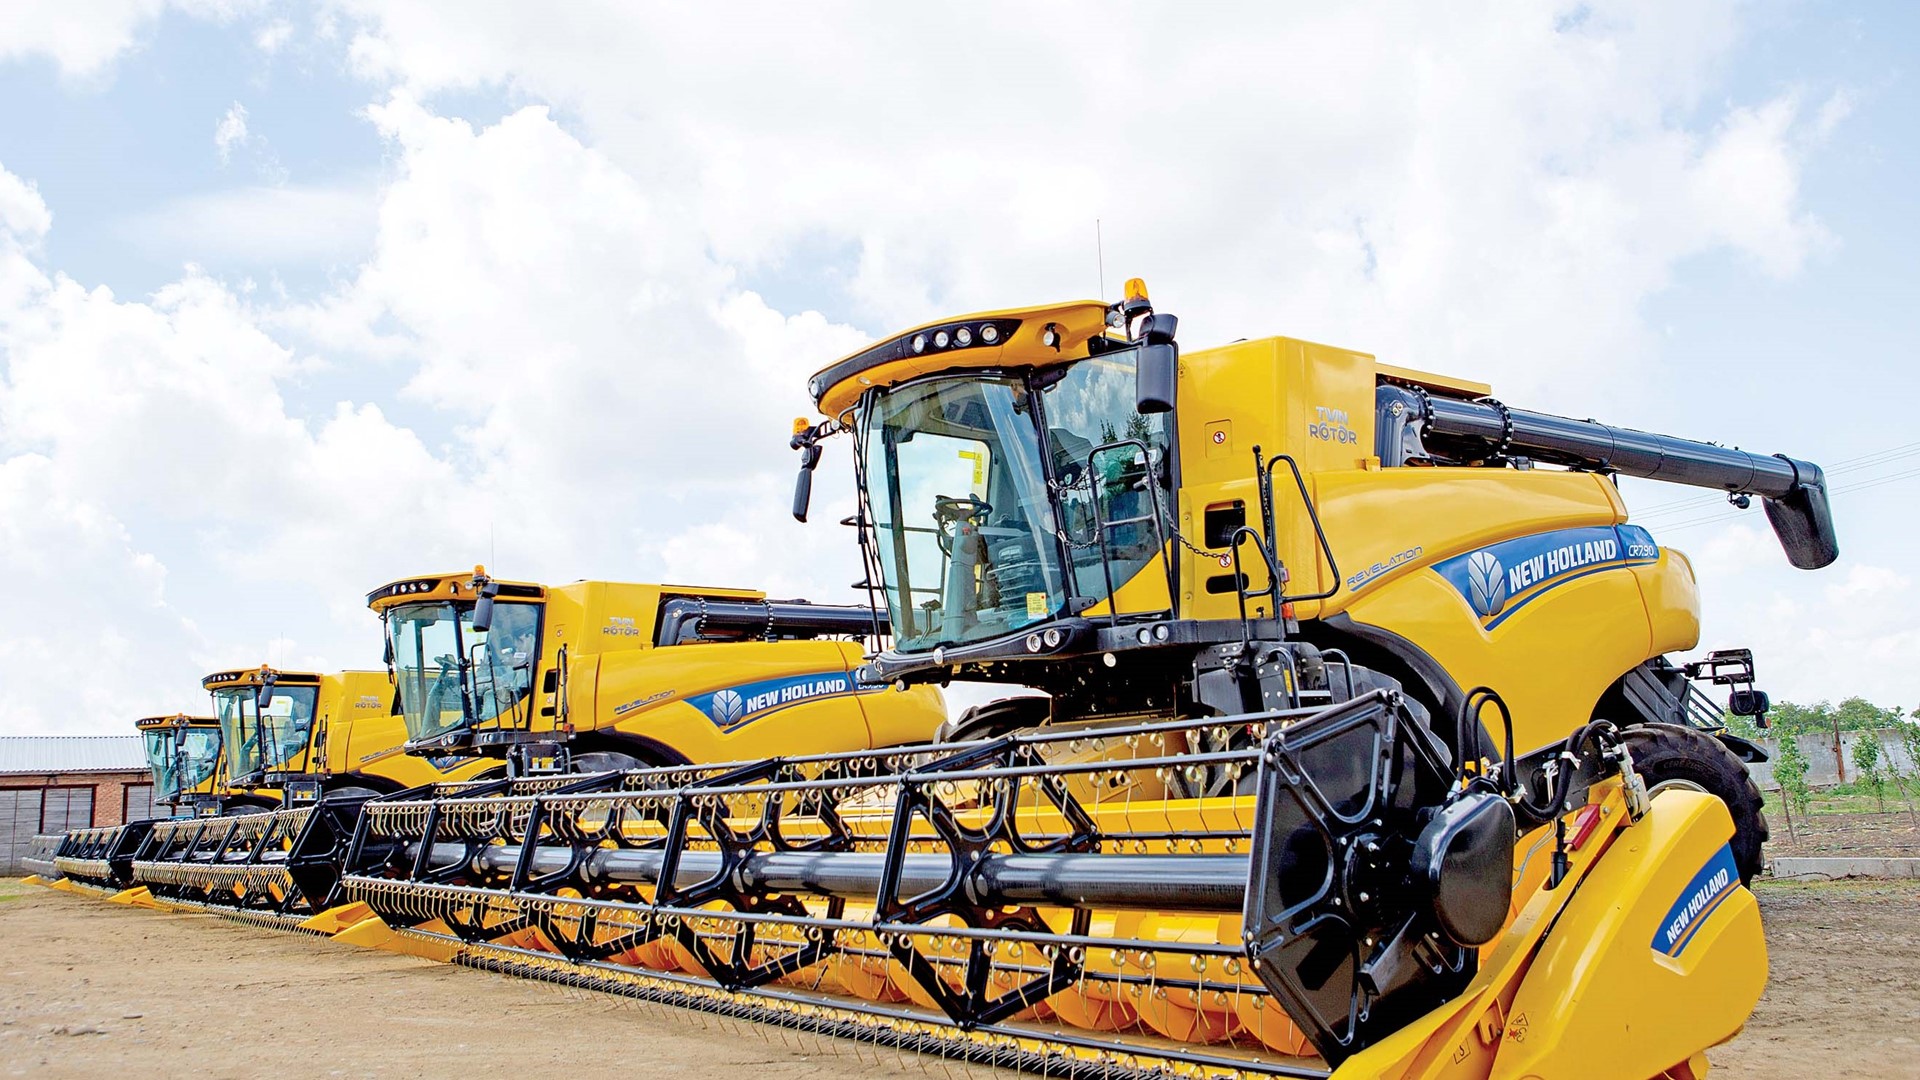 New Holland СR Revelation combine harvesters in Russia